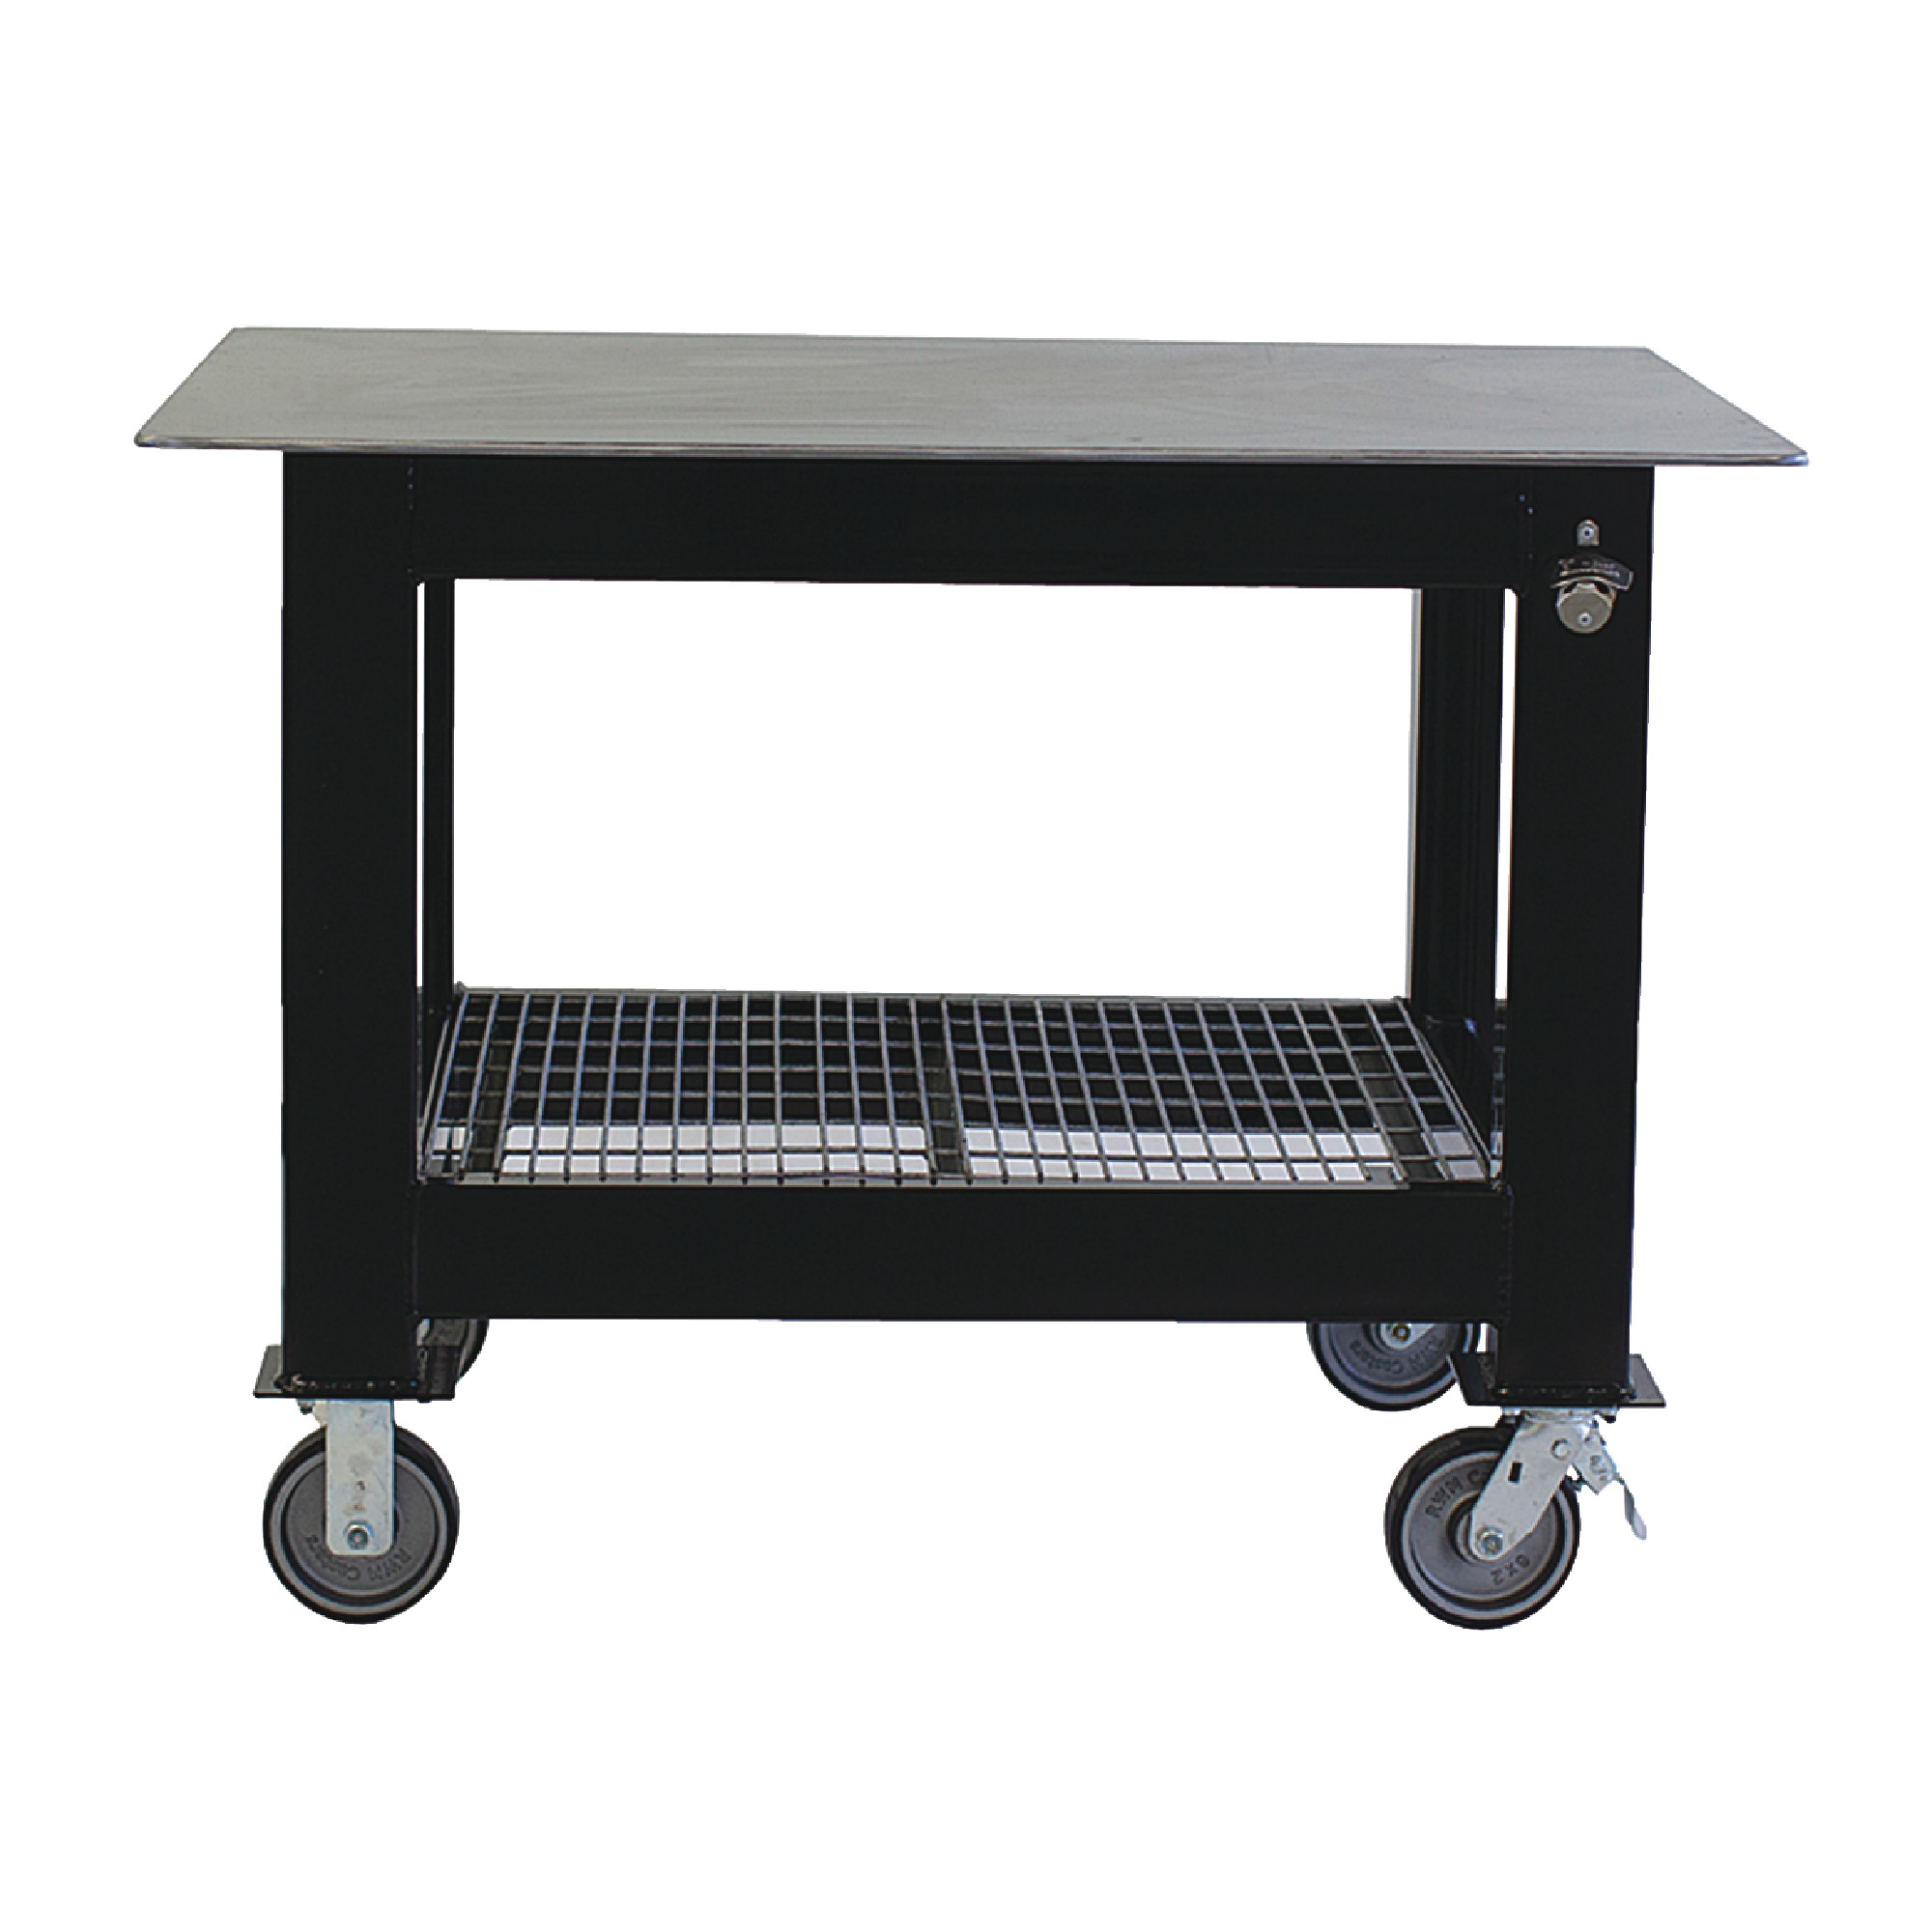 Welding Table With 3/8" Plate Steel Top & Casters